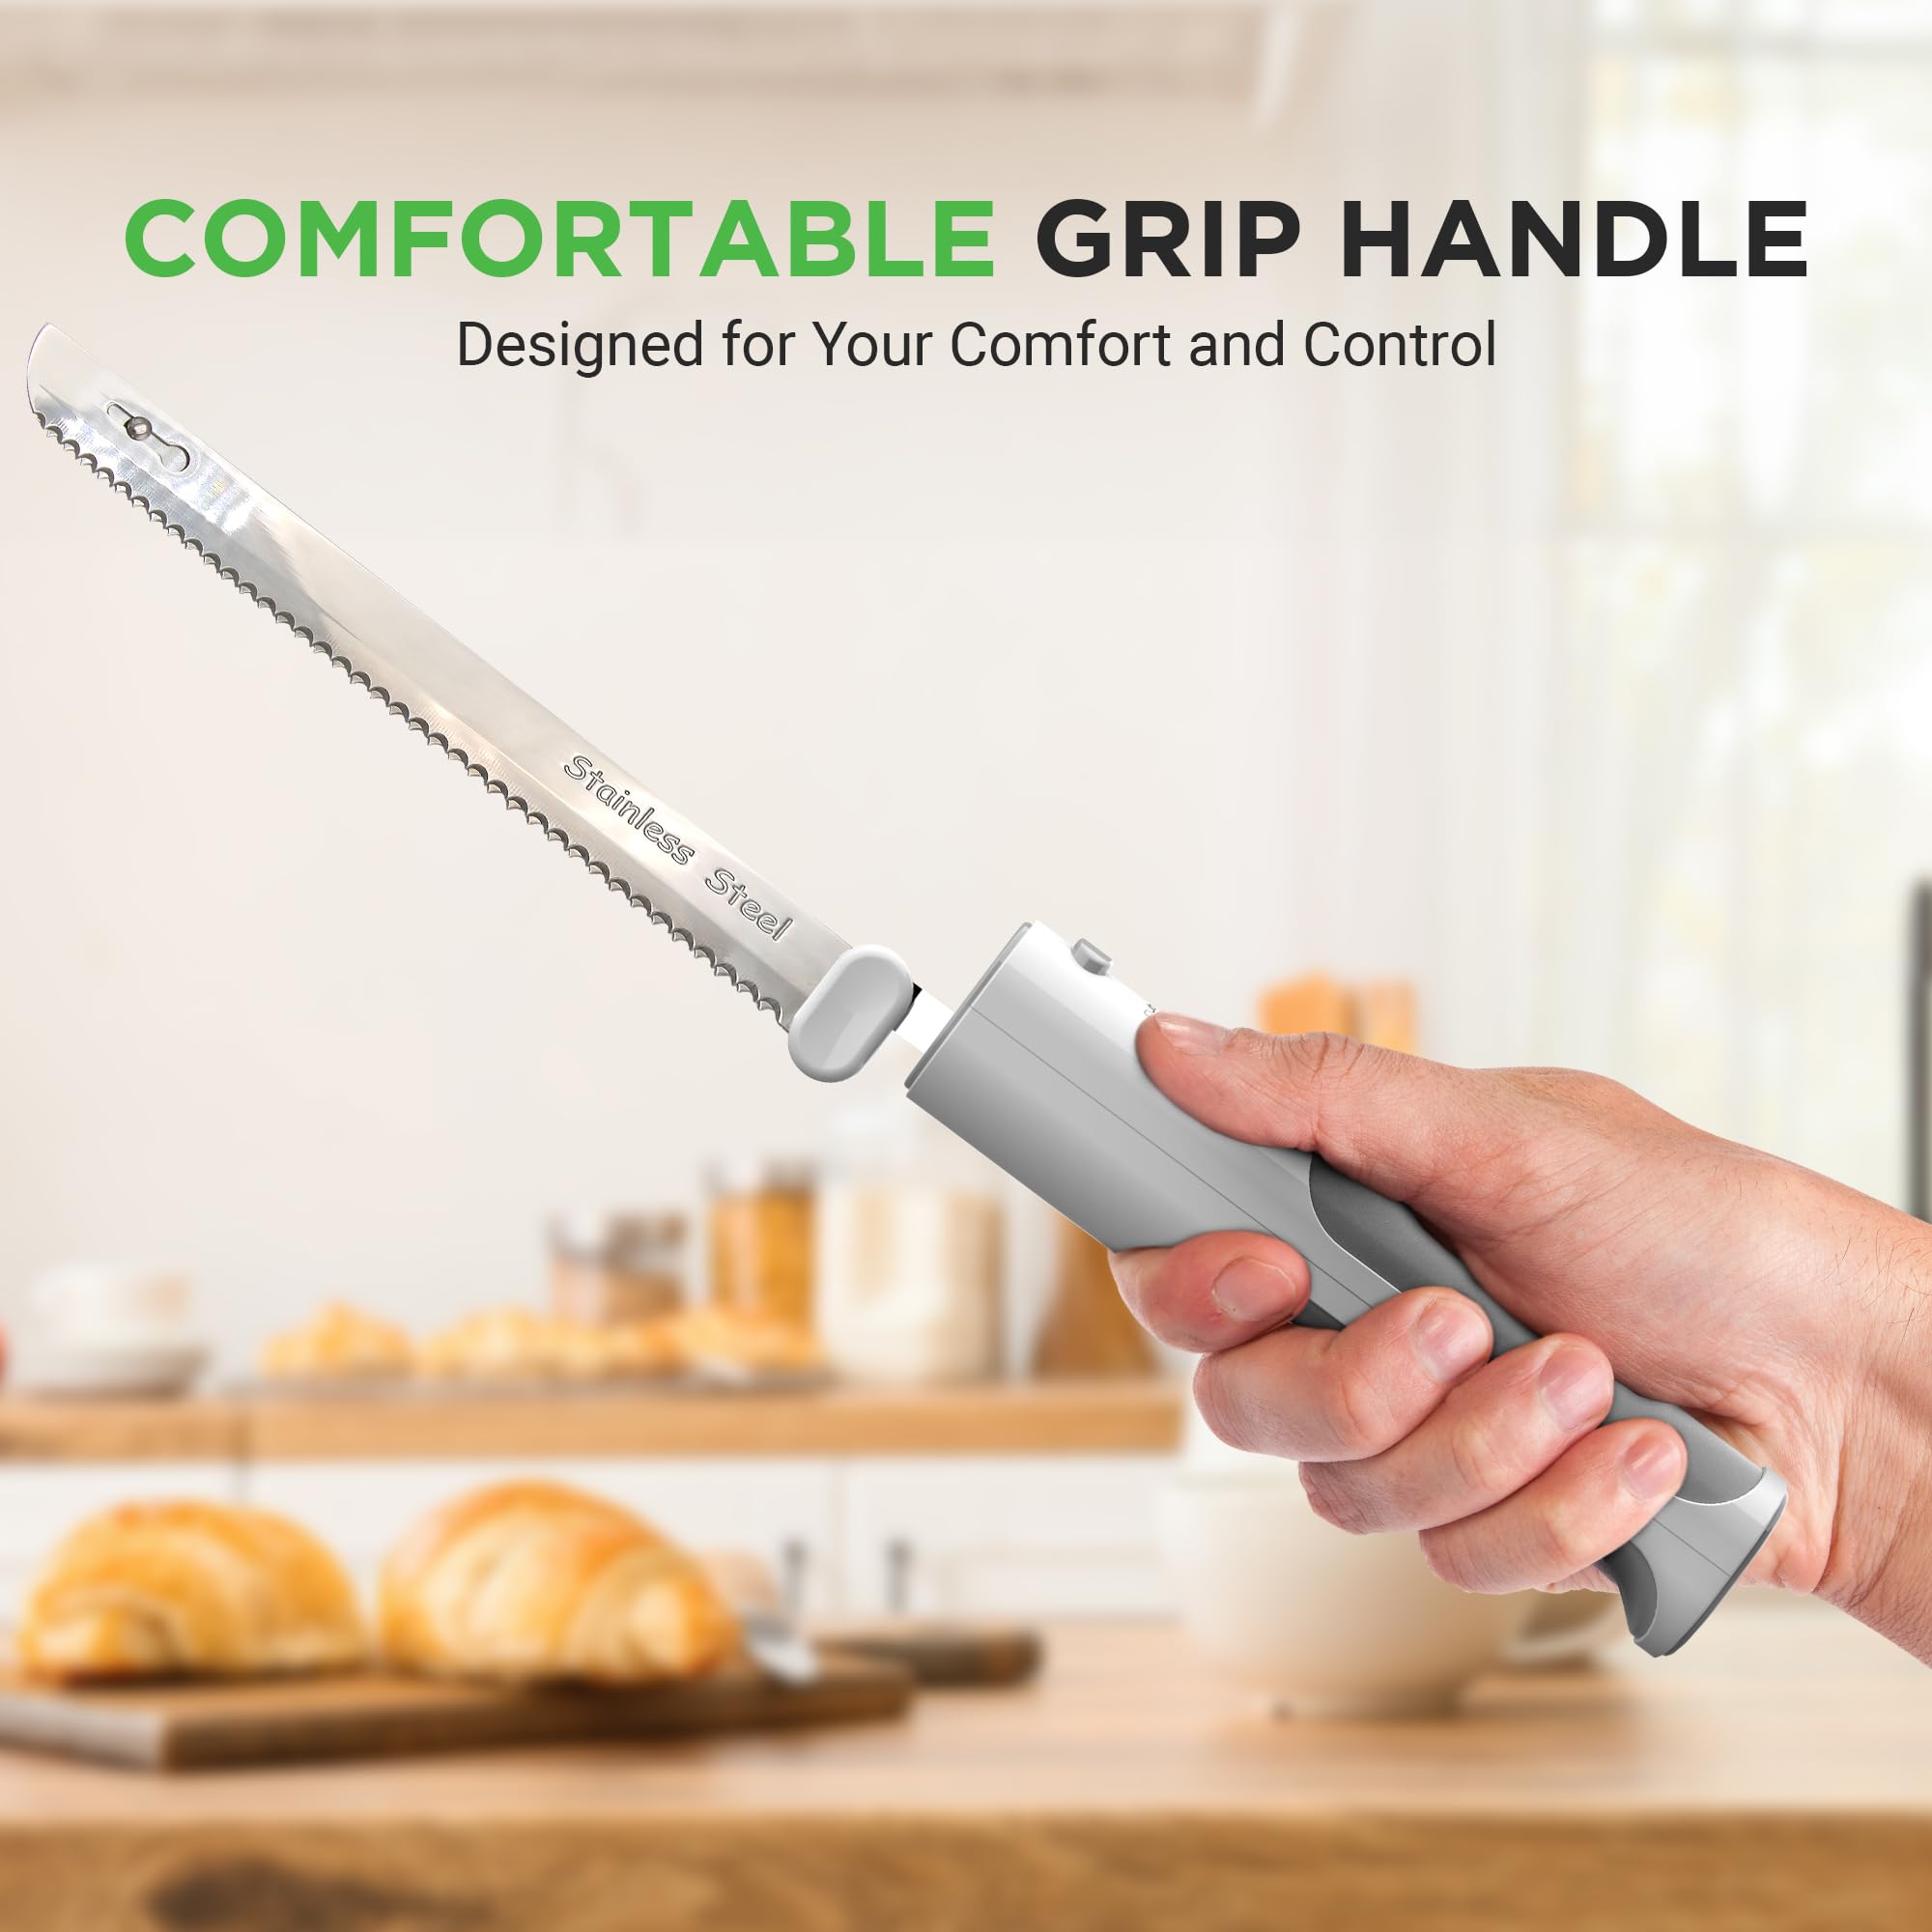 NutriChef Cordless Electric Knife | Easy to Use Constant ON/OFF Safety Function Button | Carve Turkey, Meats, Poultry, Bread, Cheese & More | Lightweight with Contoured Grip Handle (White & Grey)